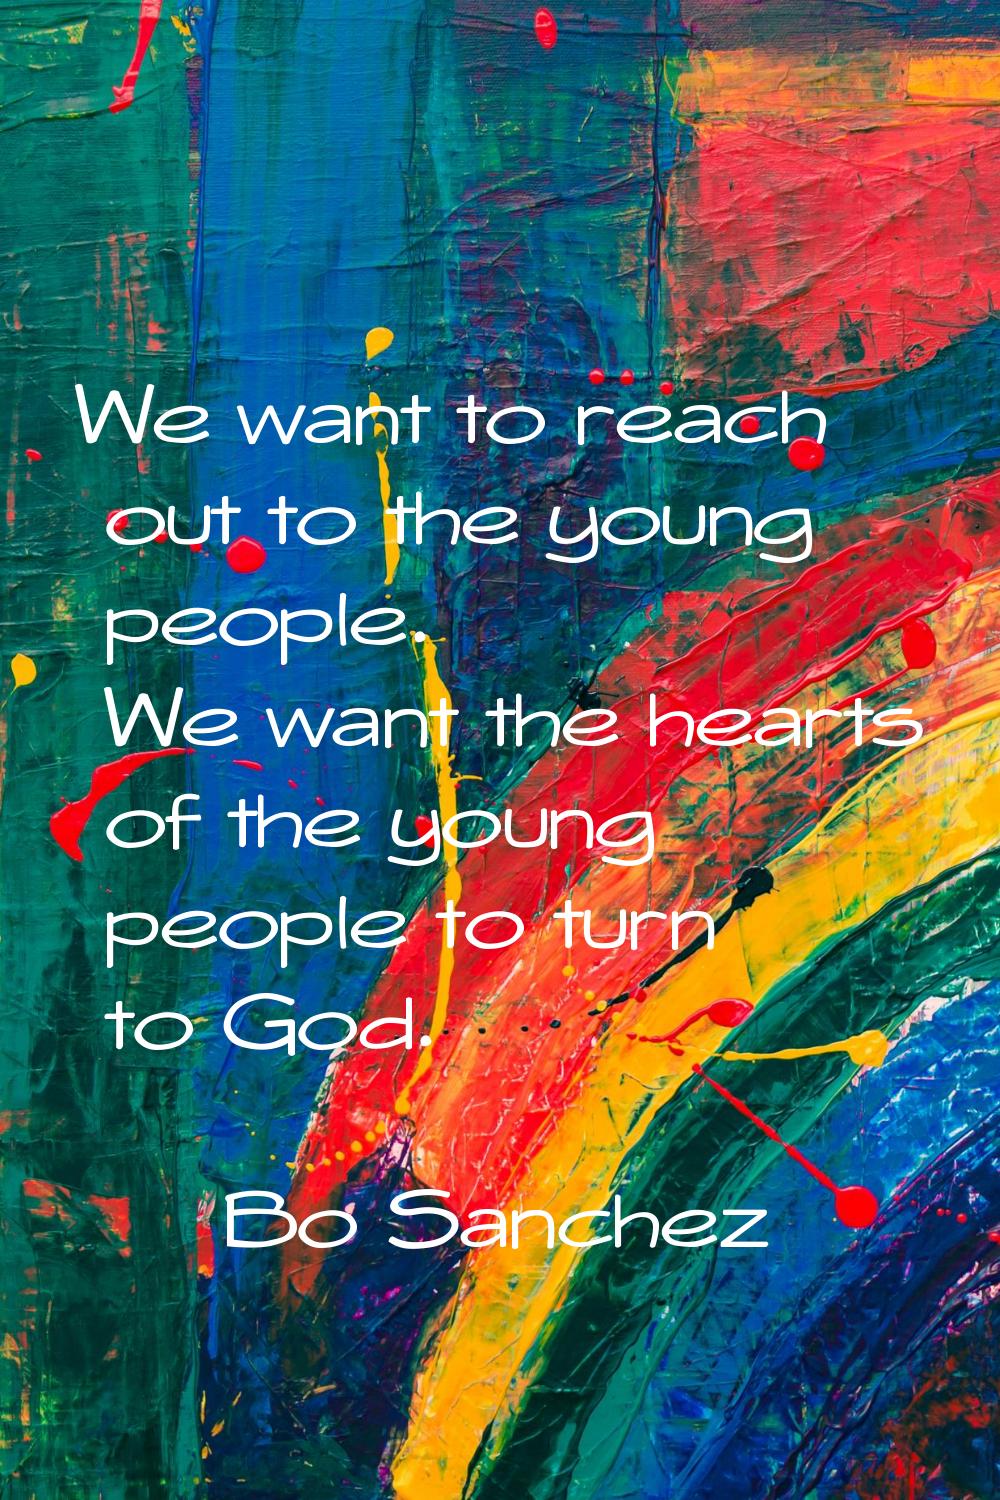 We want to reach out to the young people. We want the hearts of the young people to turn to God.